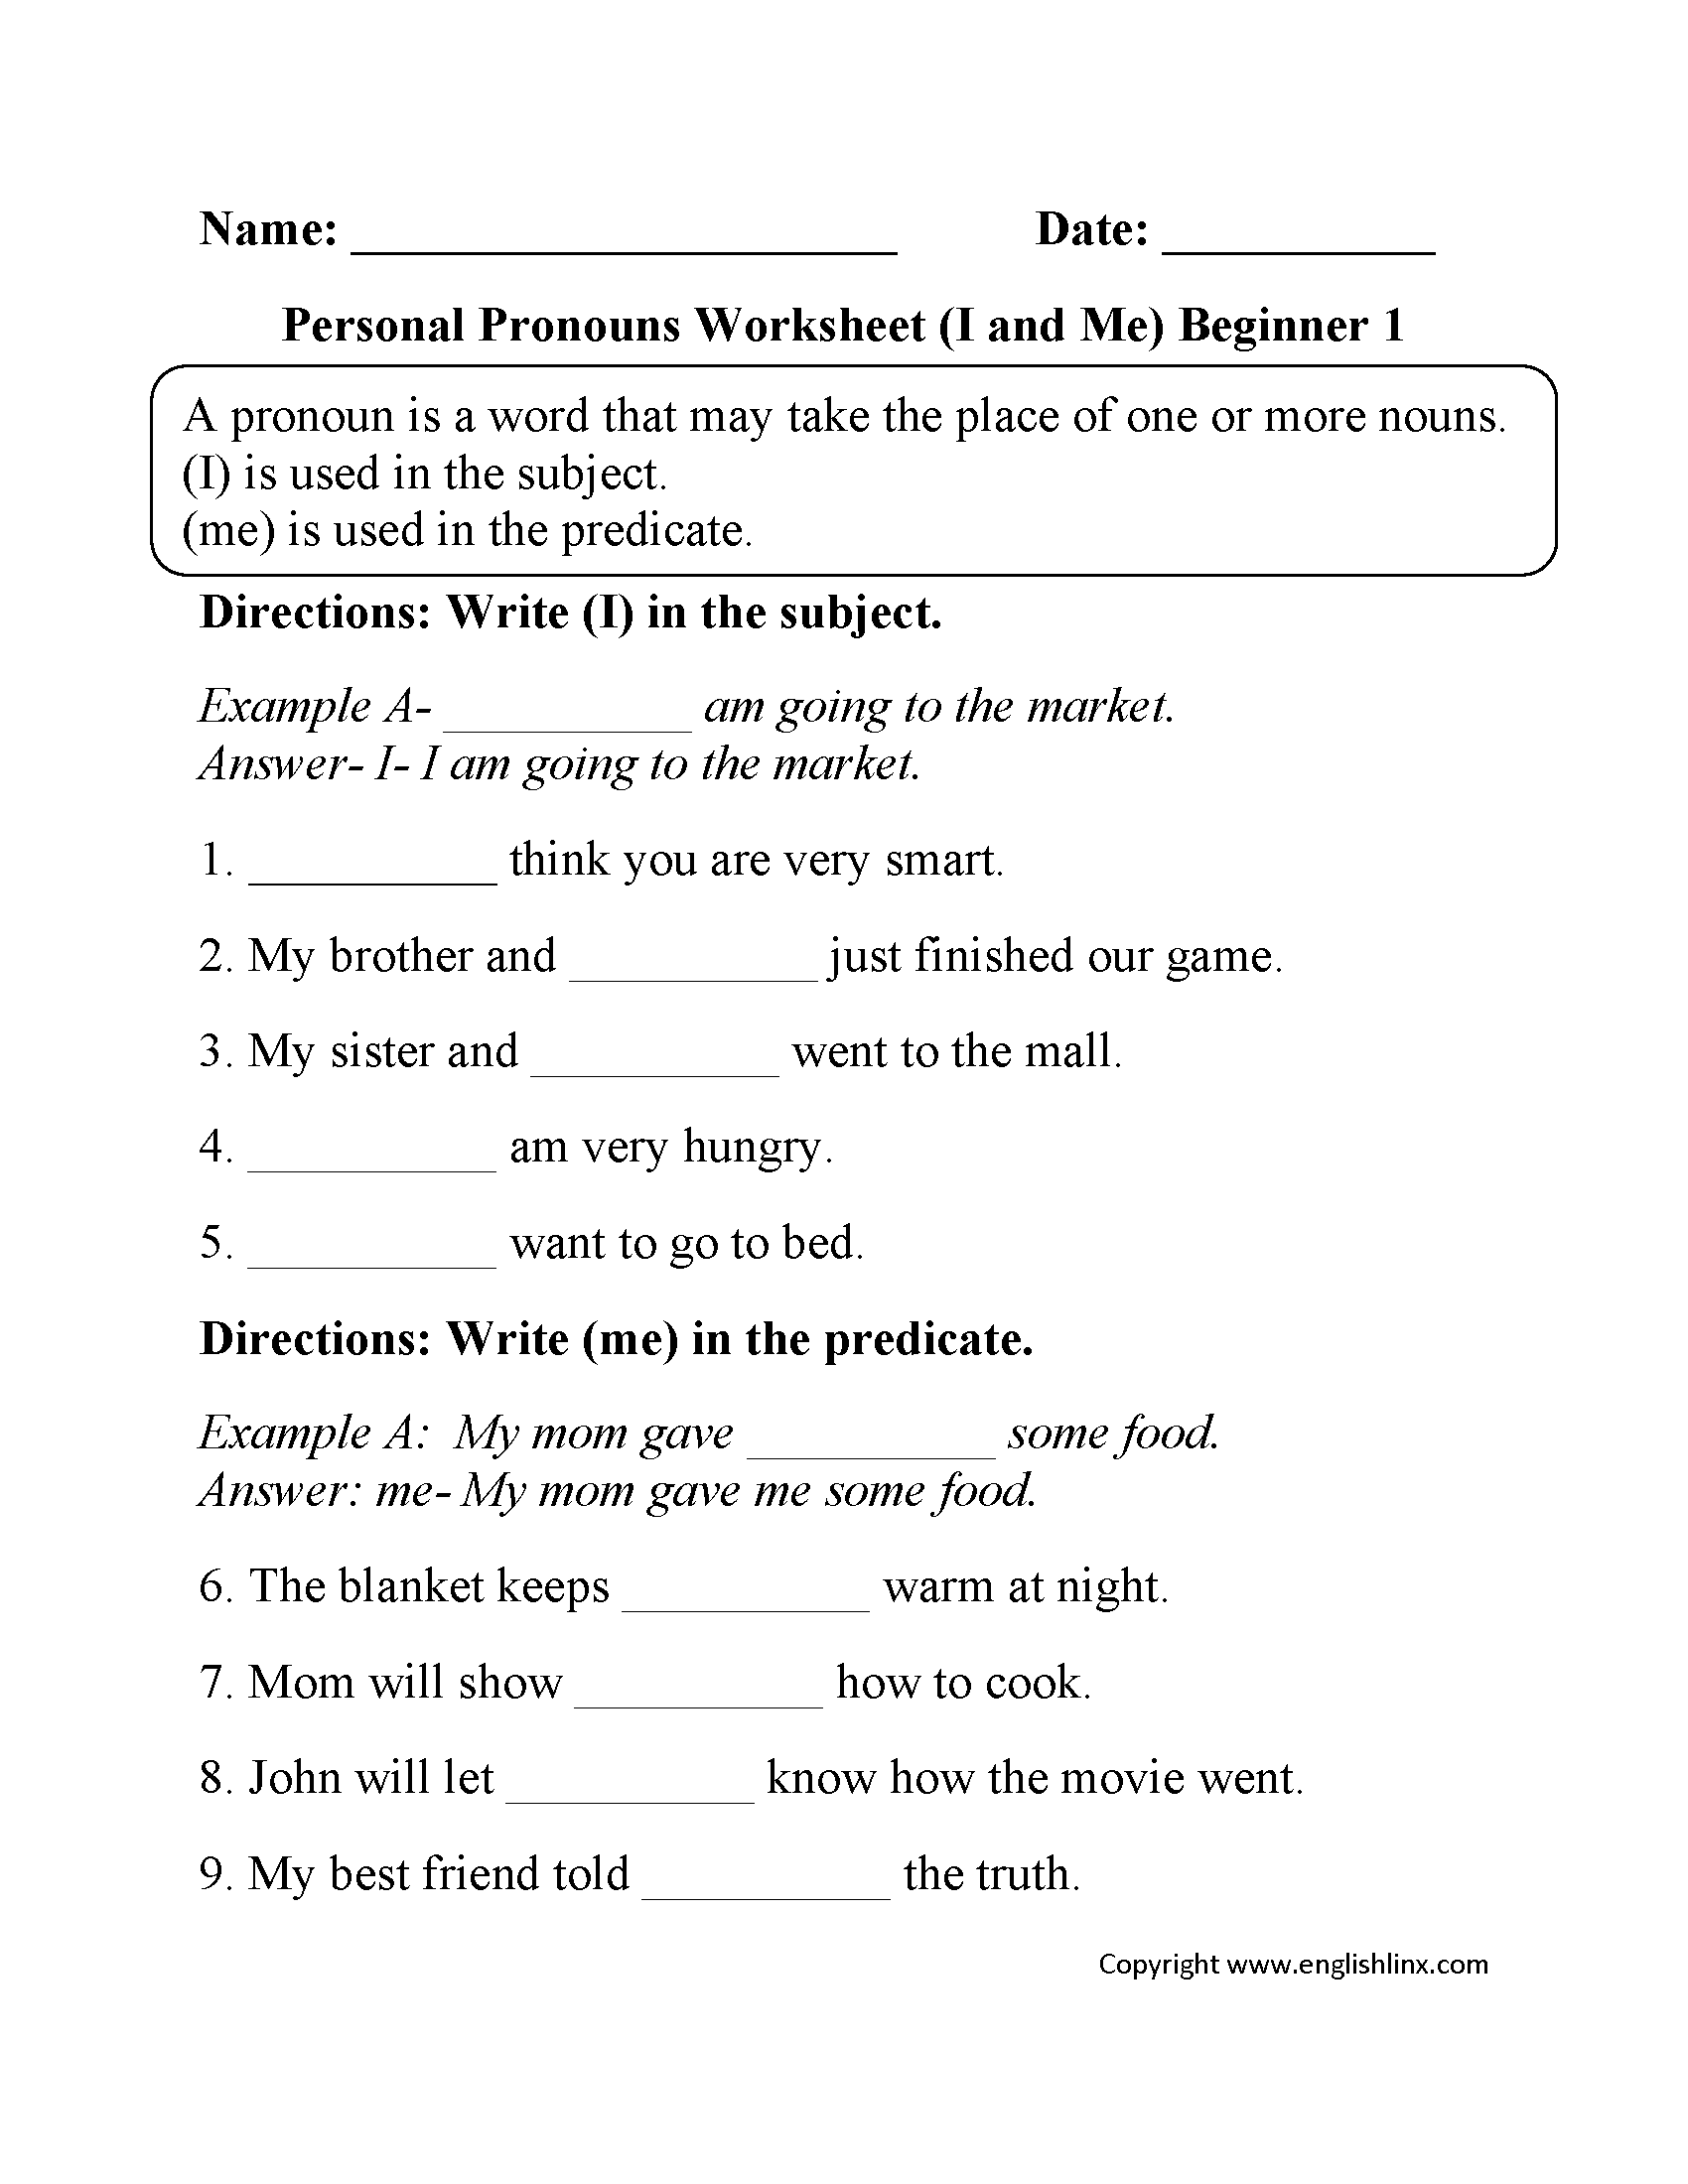 personal-pronouns-worksheets-i-and-me-personal-pronouns-worksheets-beginner-part-1